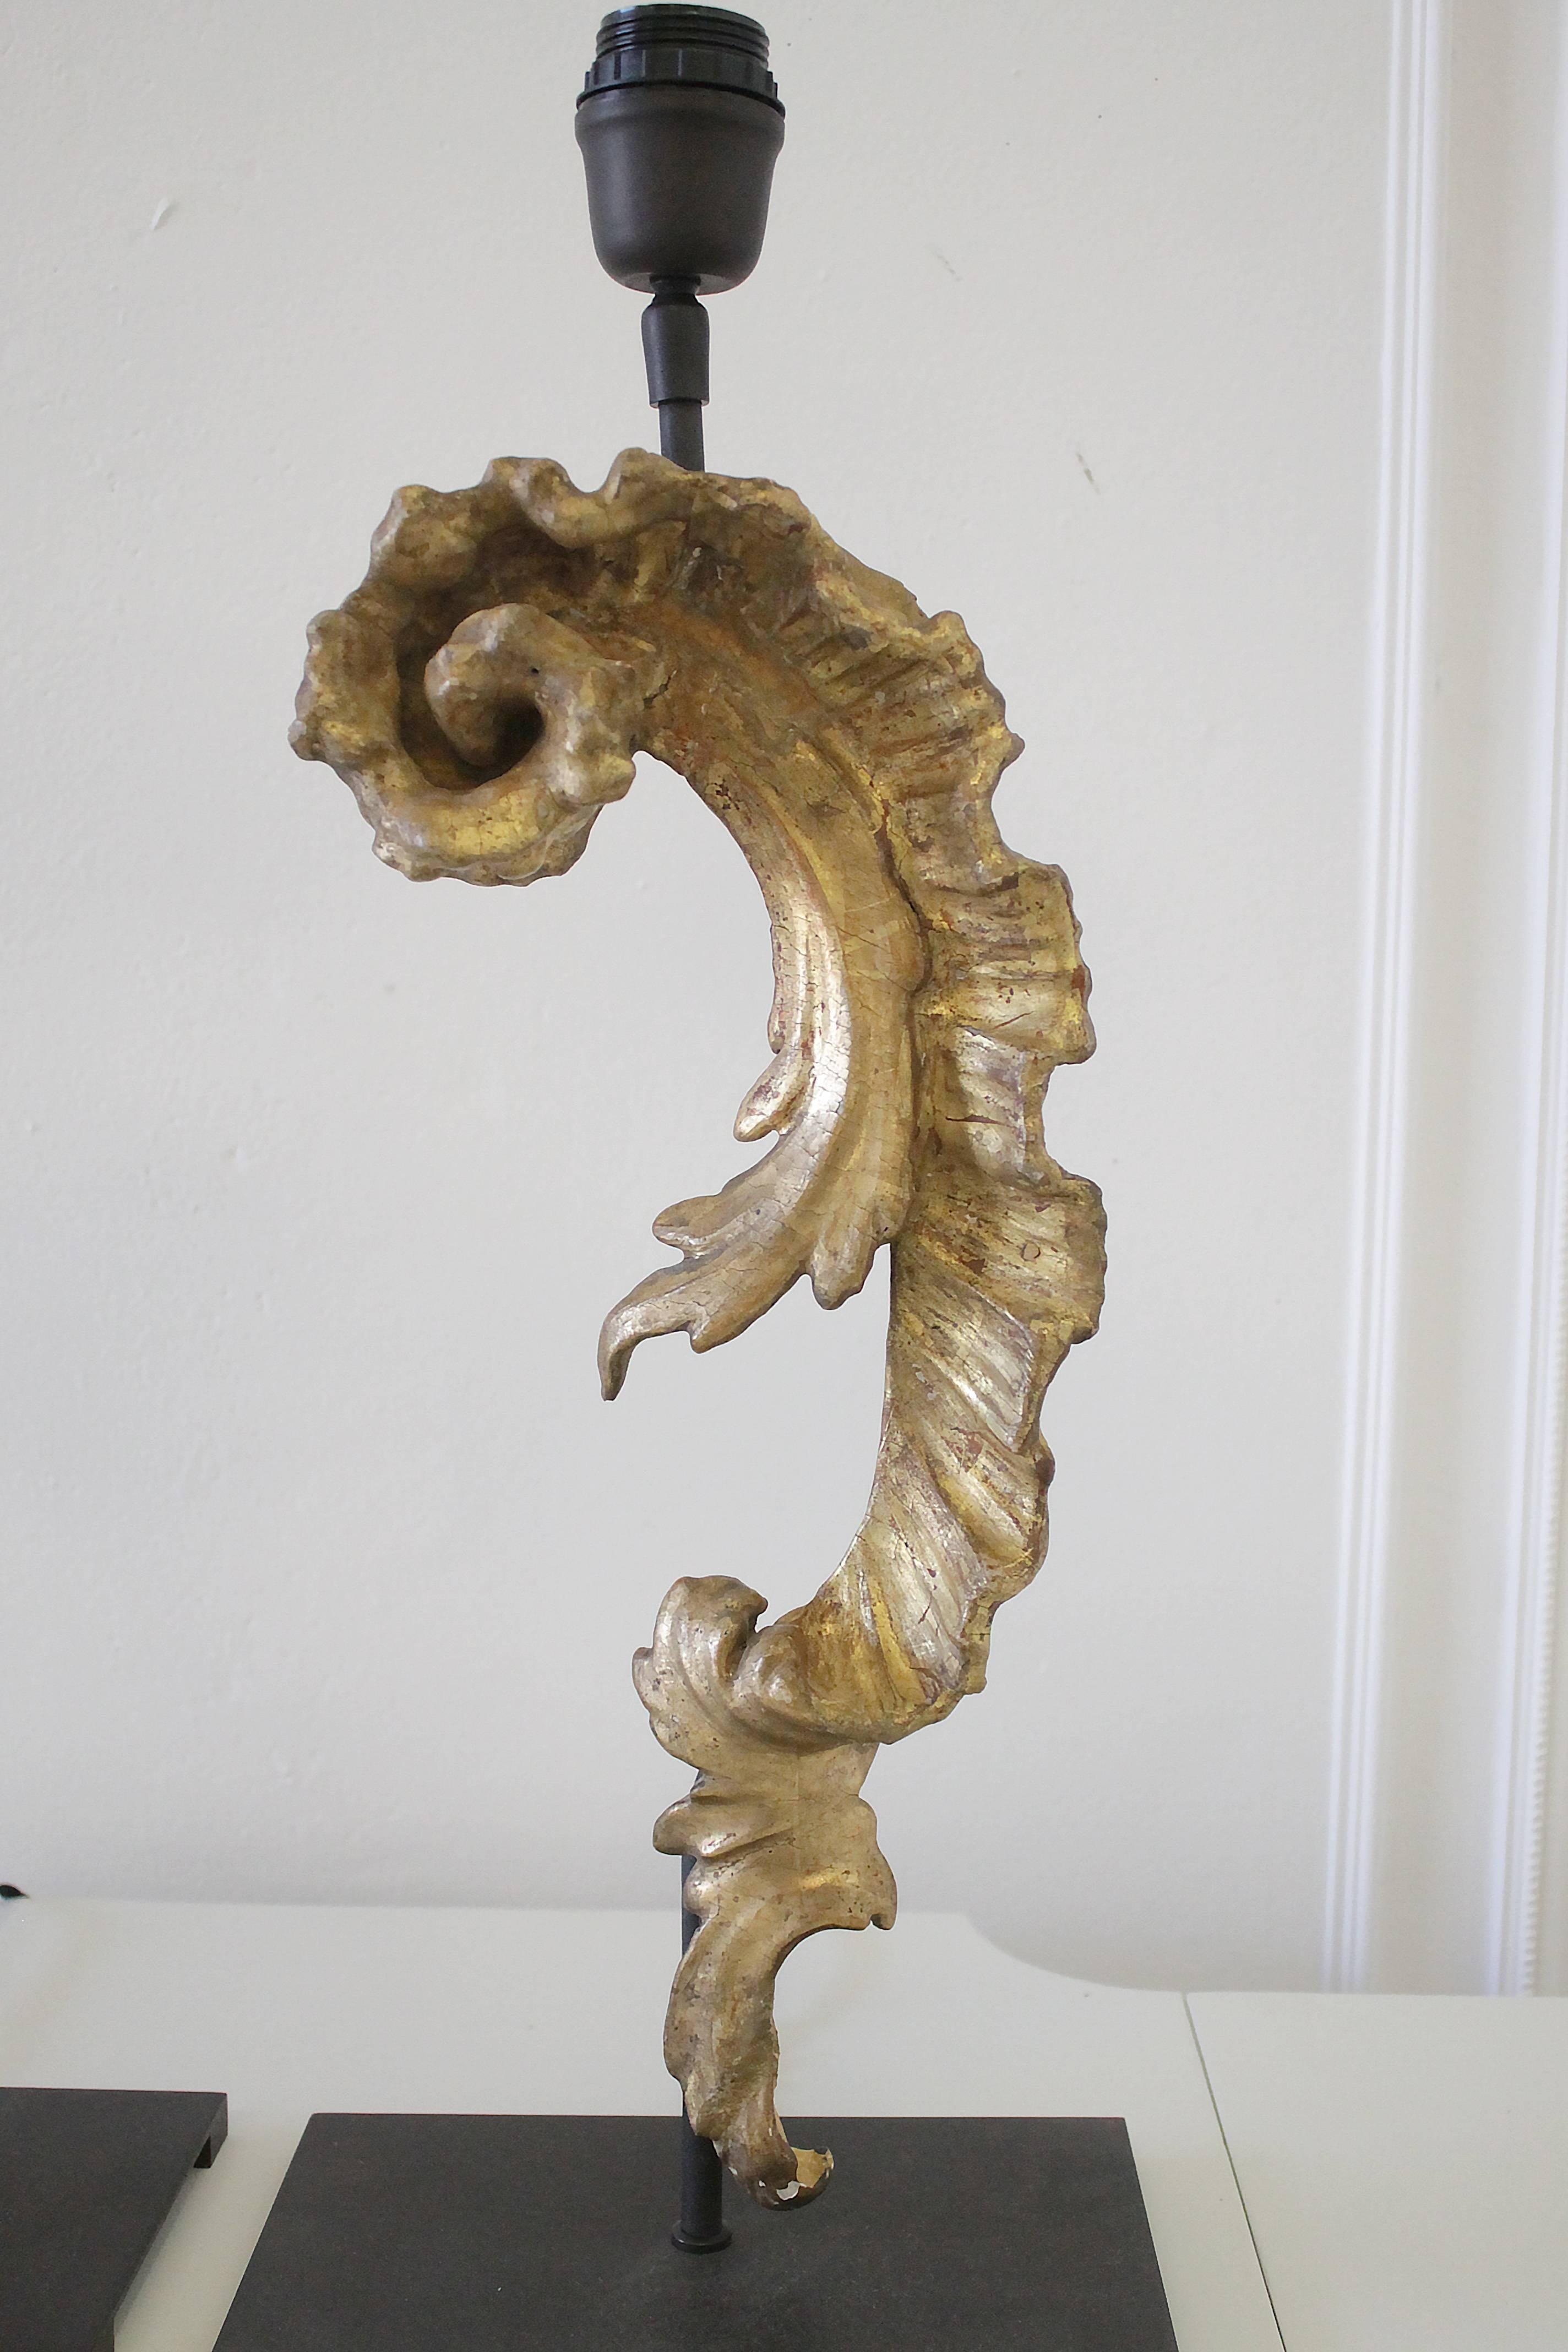 French Provincial 19th Century Gilt French Fragment Decorative Lamps